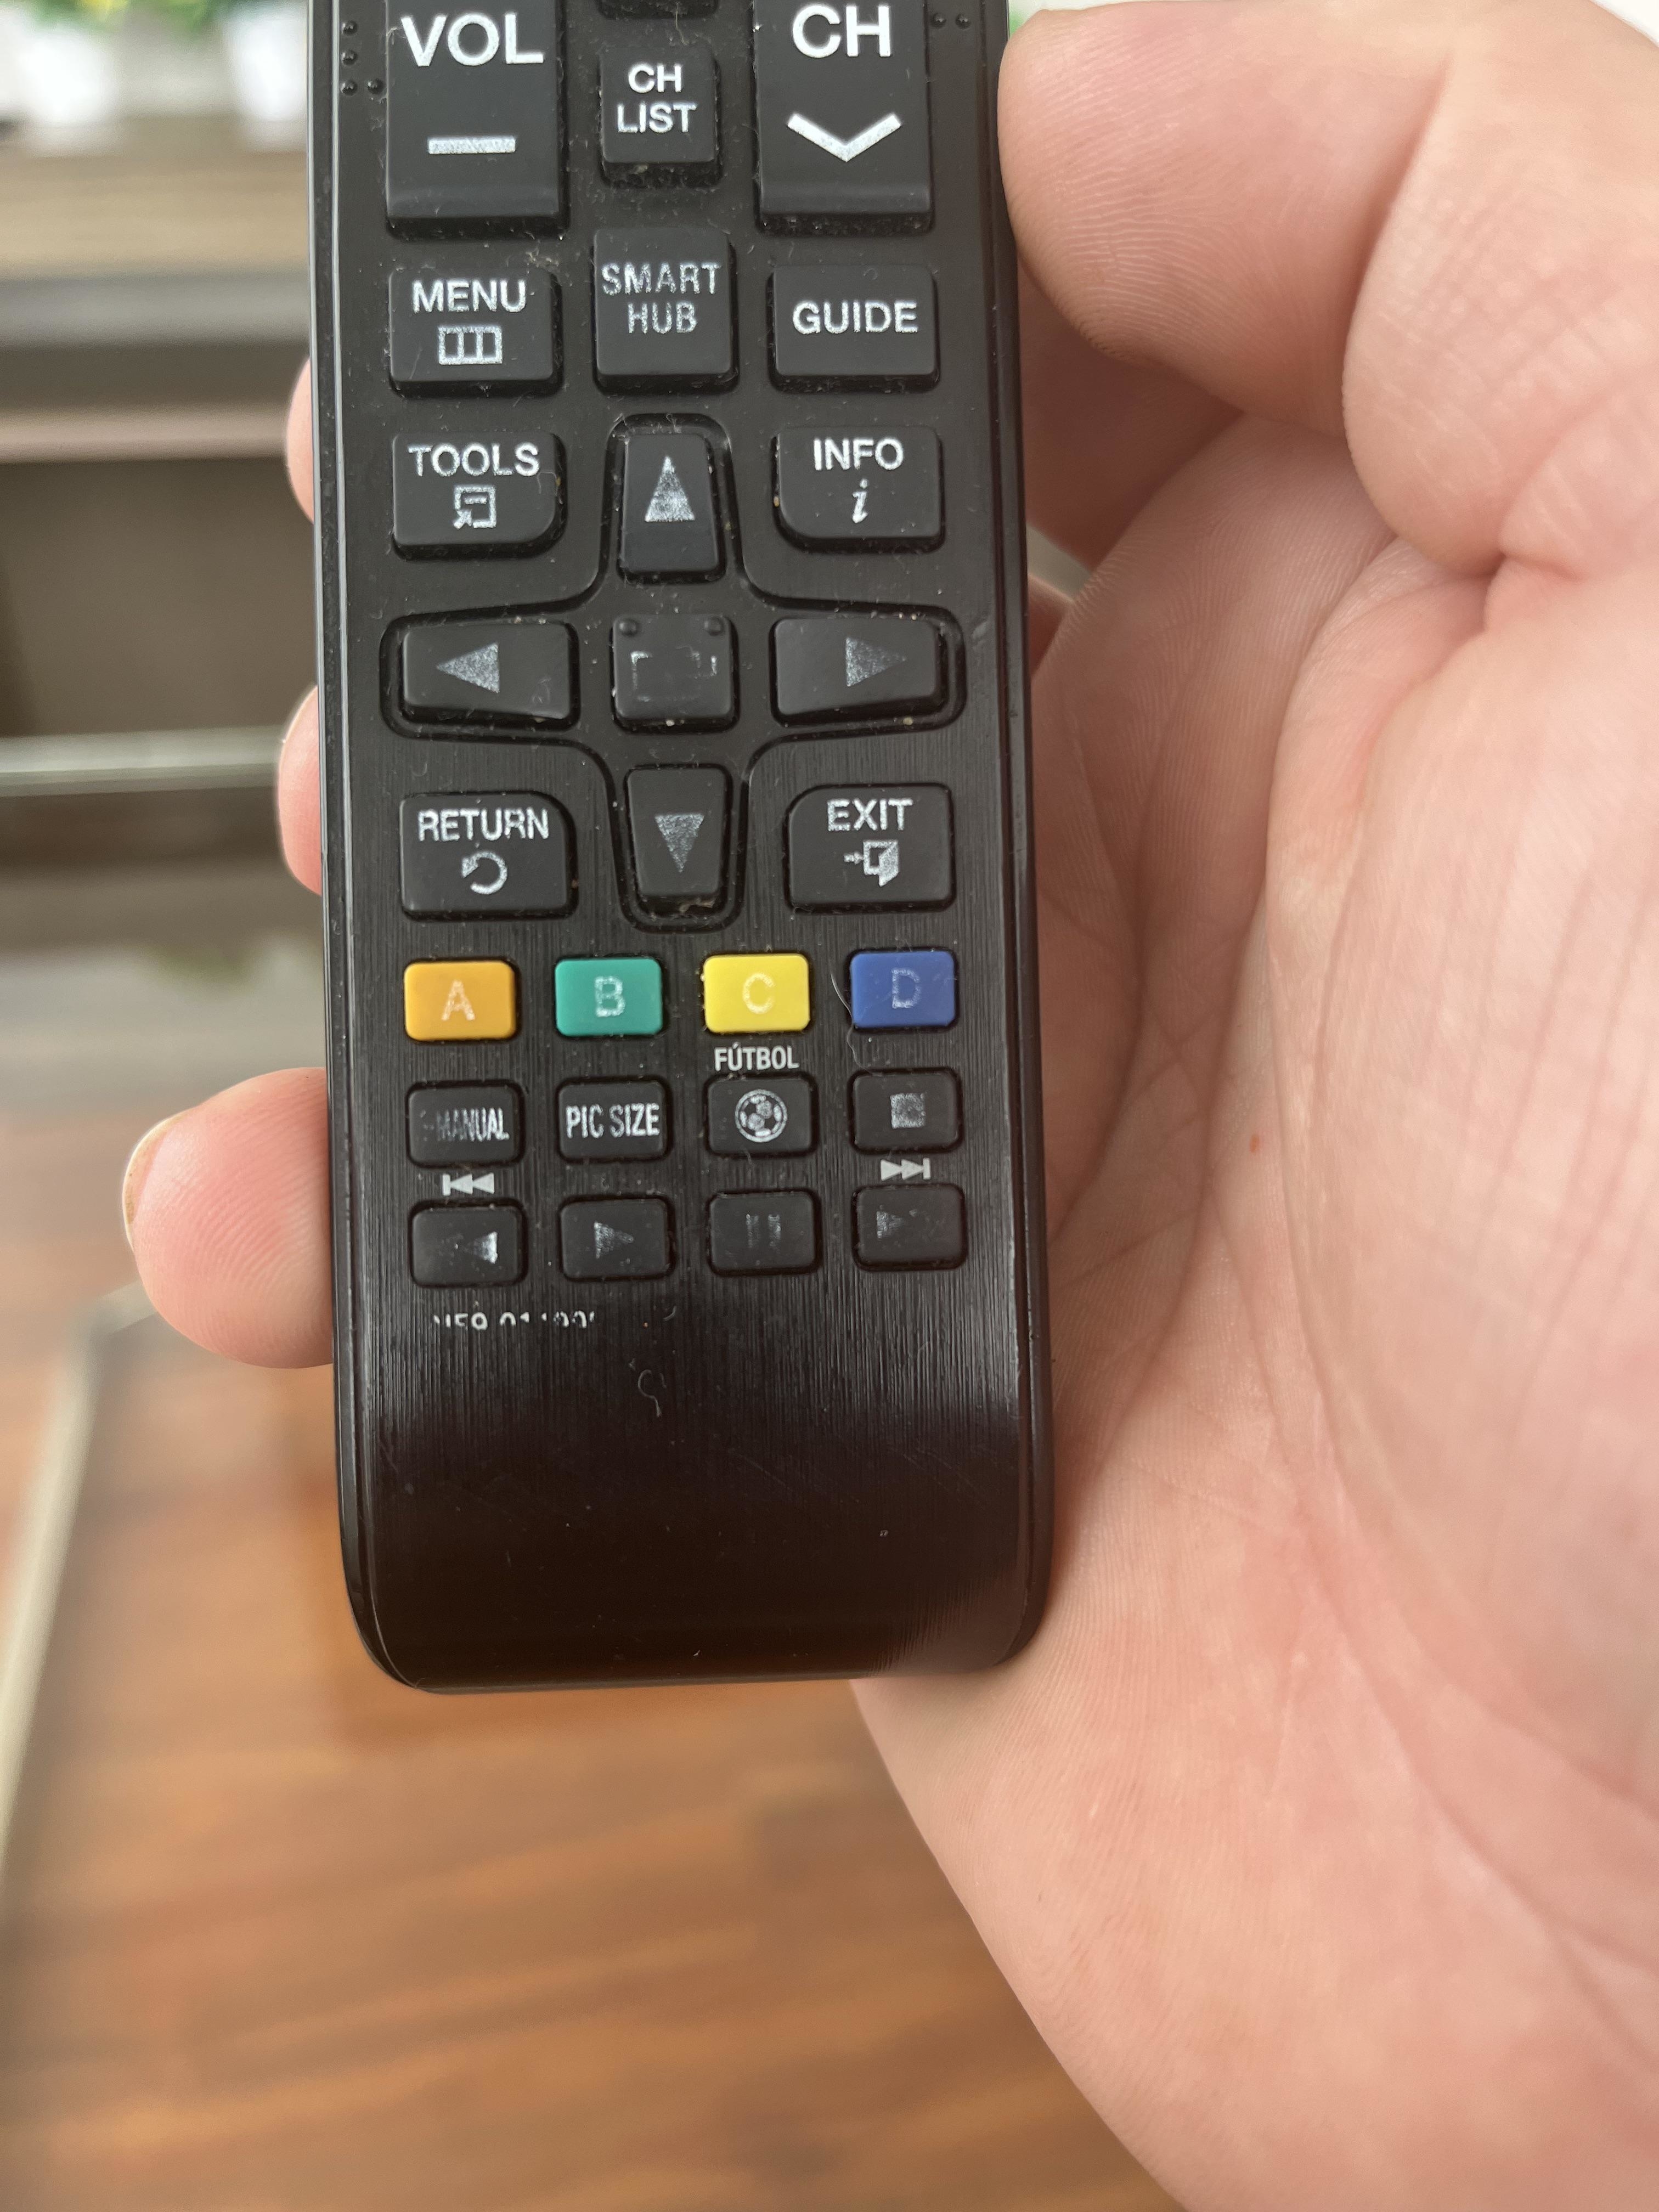 Person holding a television remote with various buttons for functions like volume, channel selection, and settings